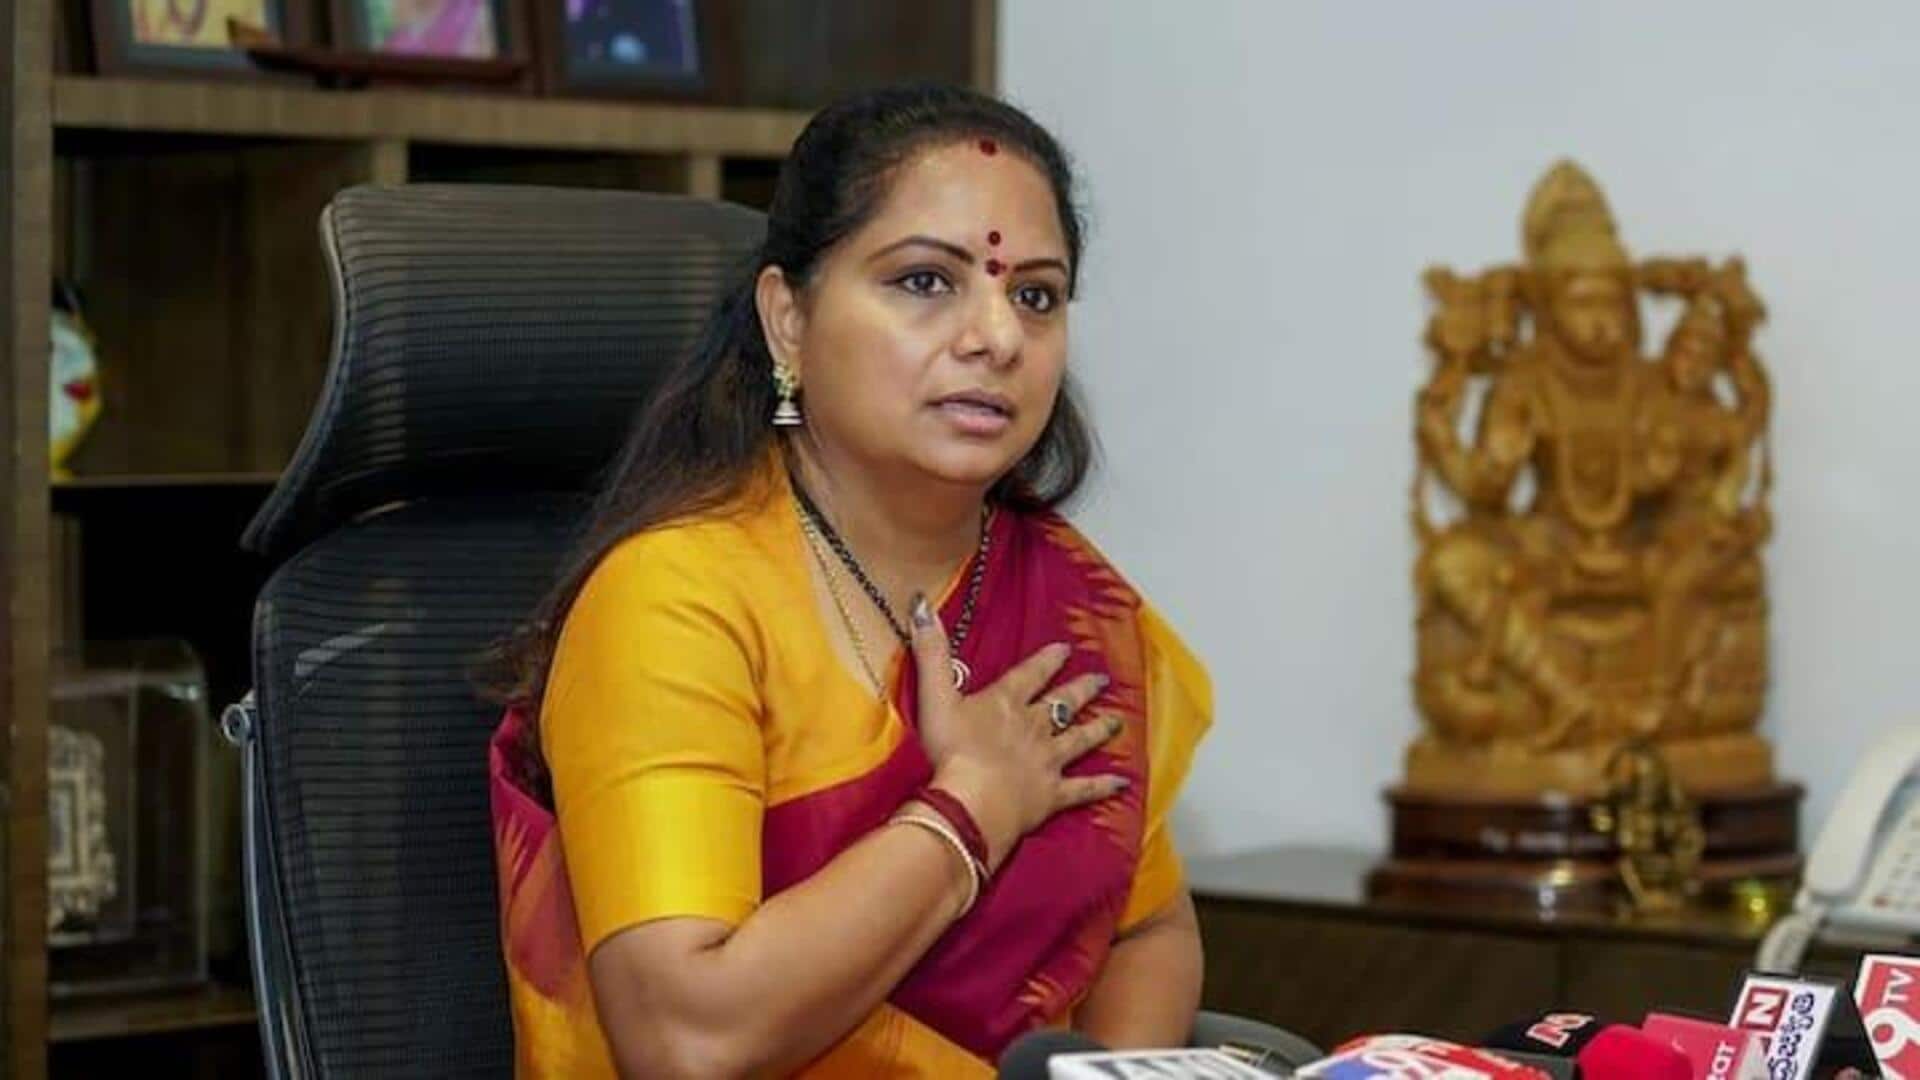 Kavitha threatened excise policy co-accused's business: CBI tells court